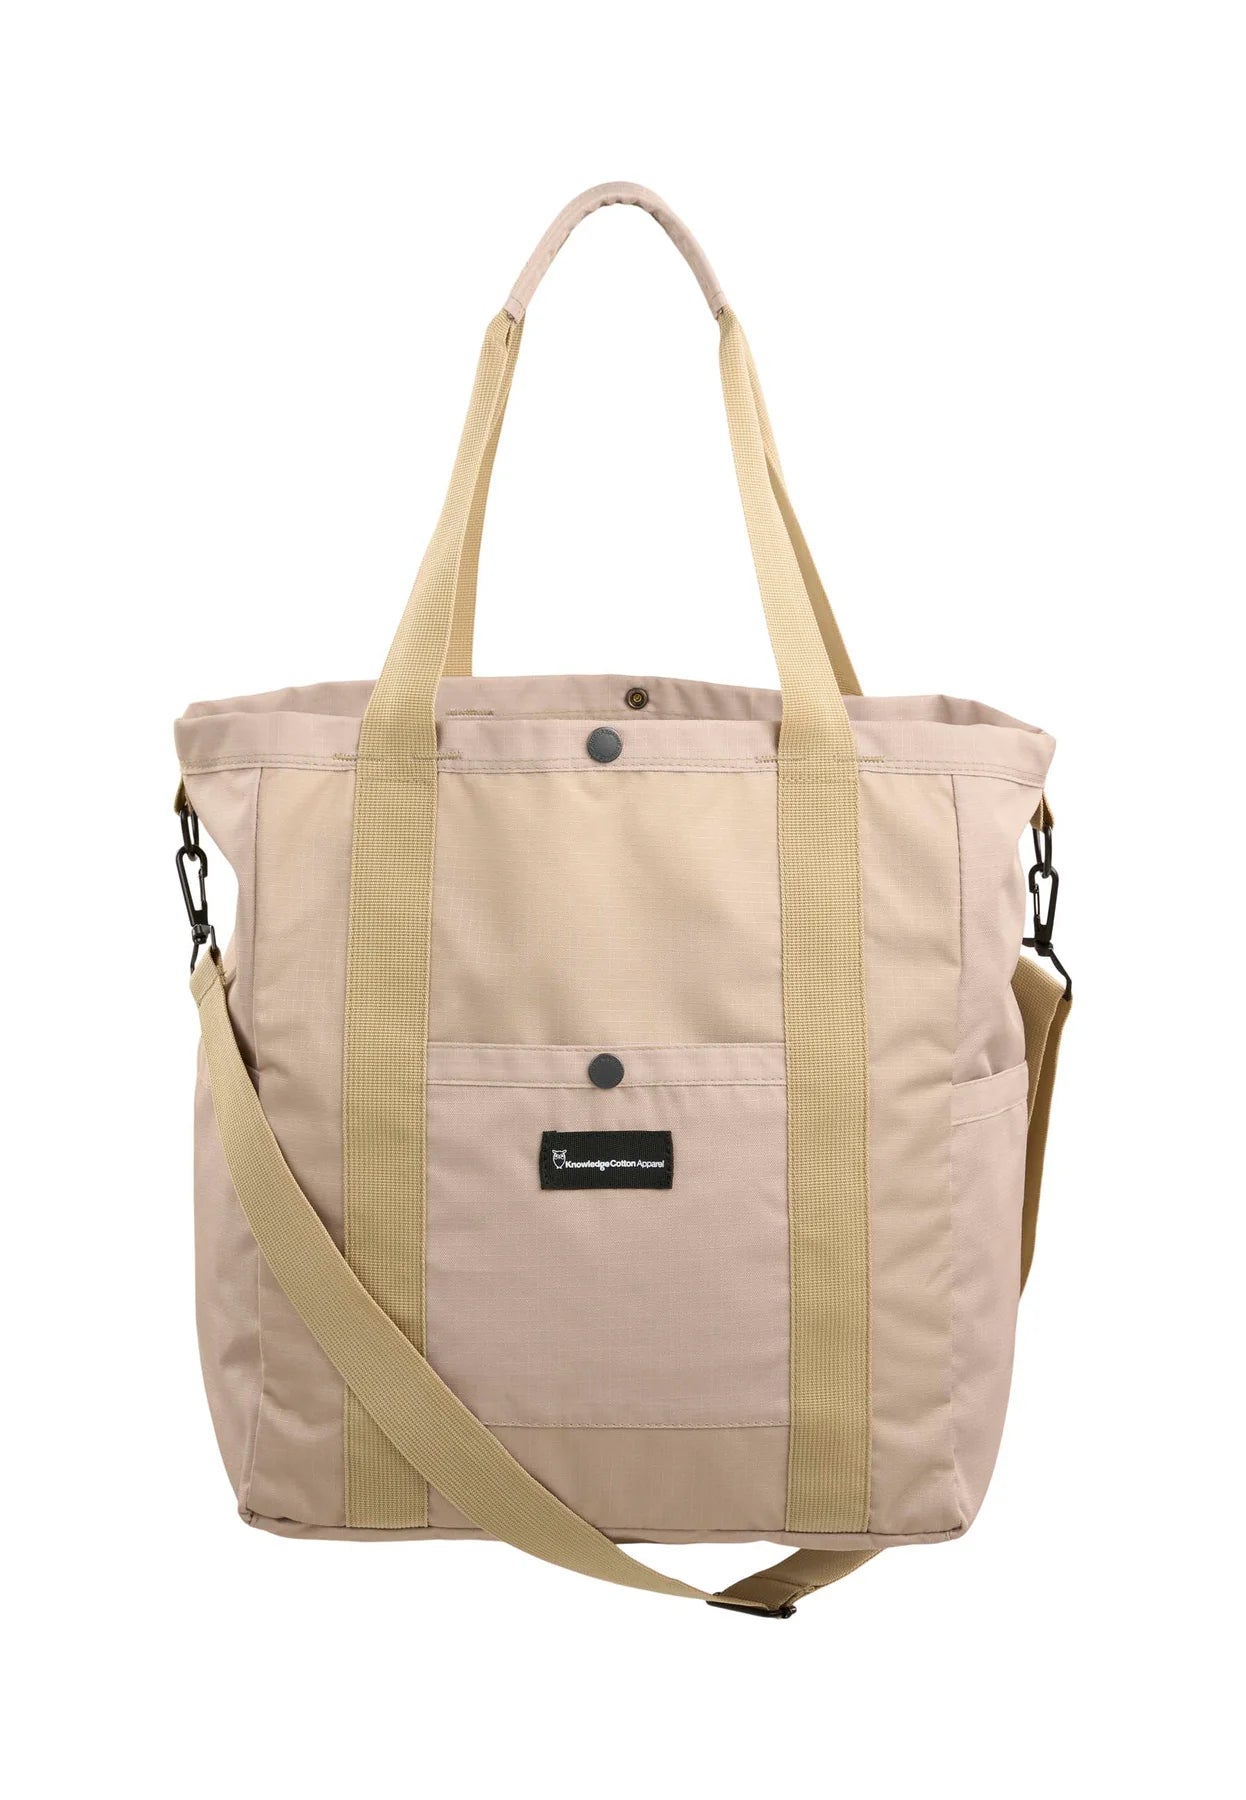 KnowledgeCotton Apparel Big Tote Pack with Shoulderstrap - Recycled Polyester Safari Bags